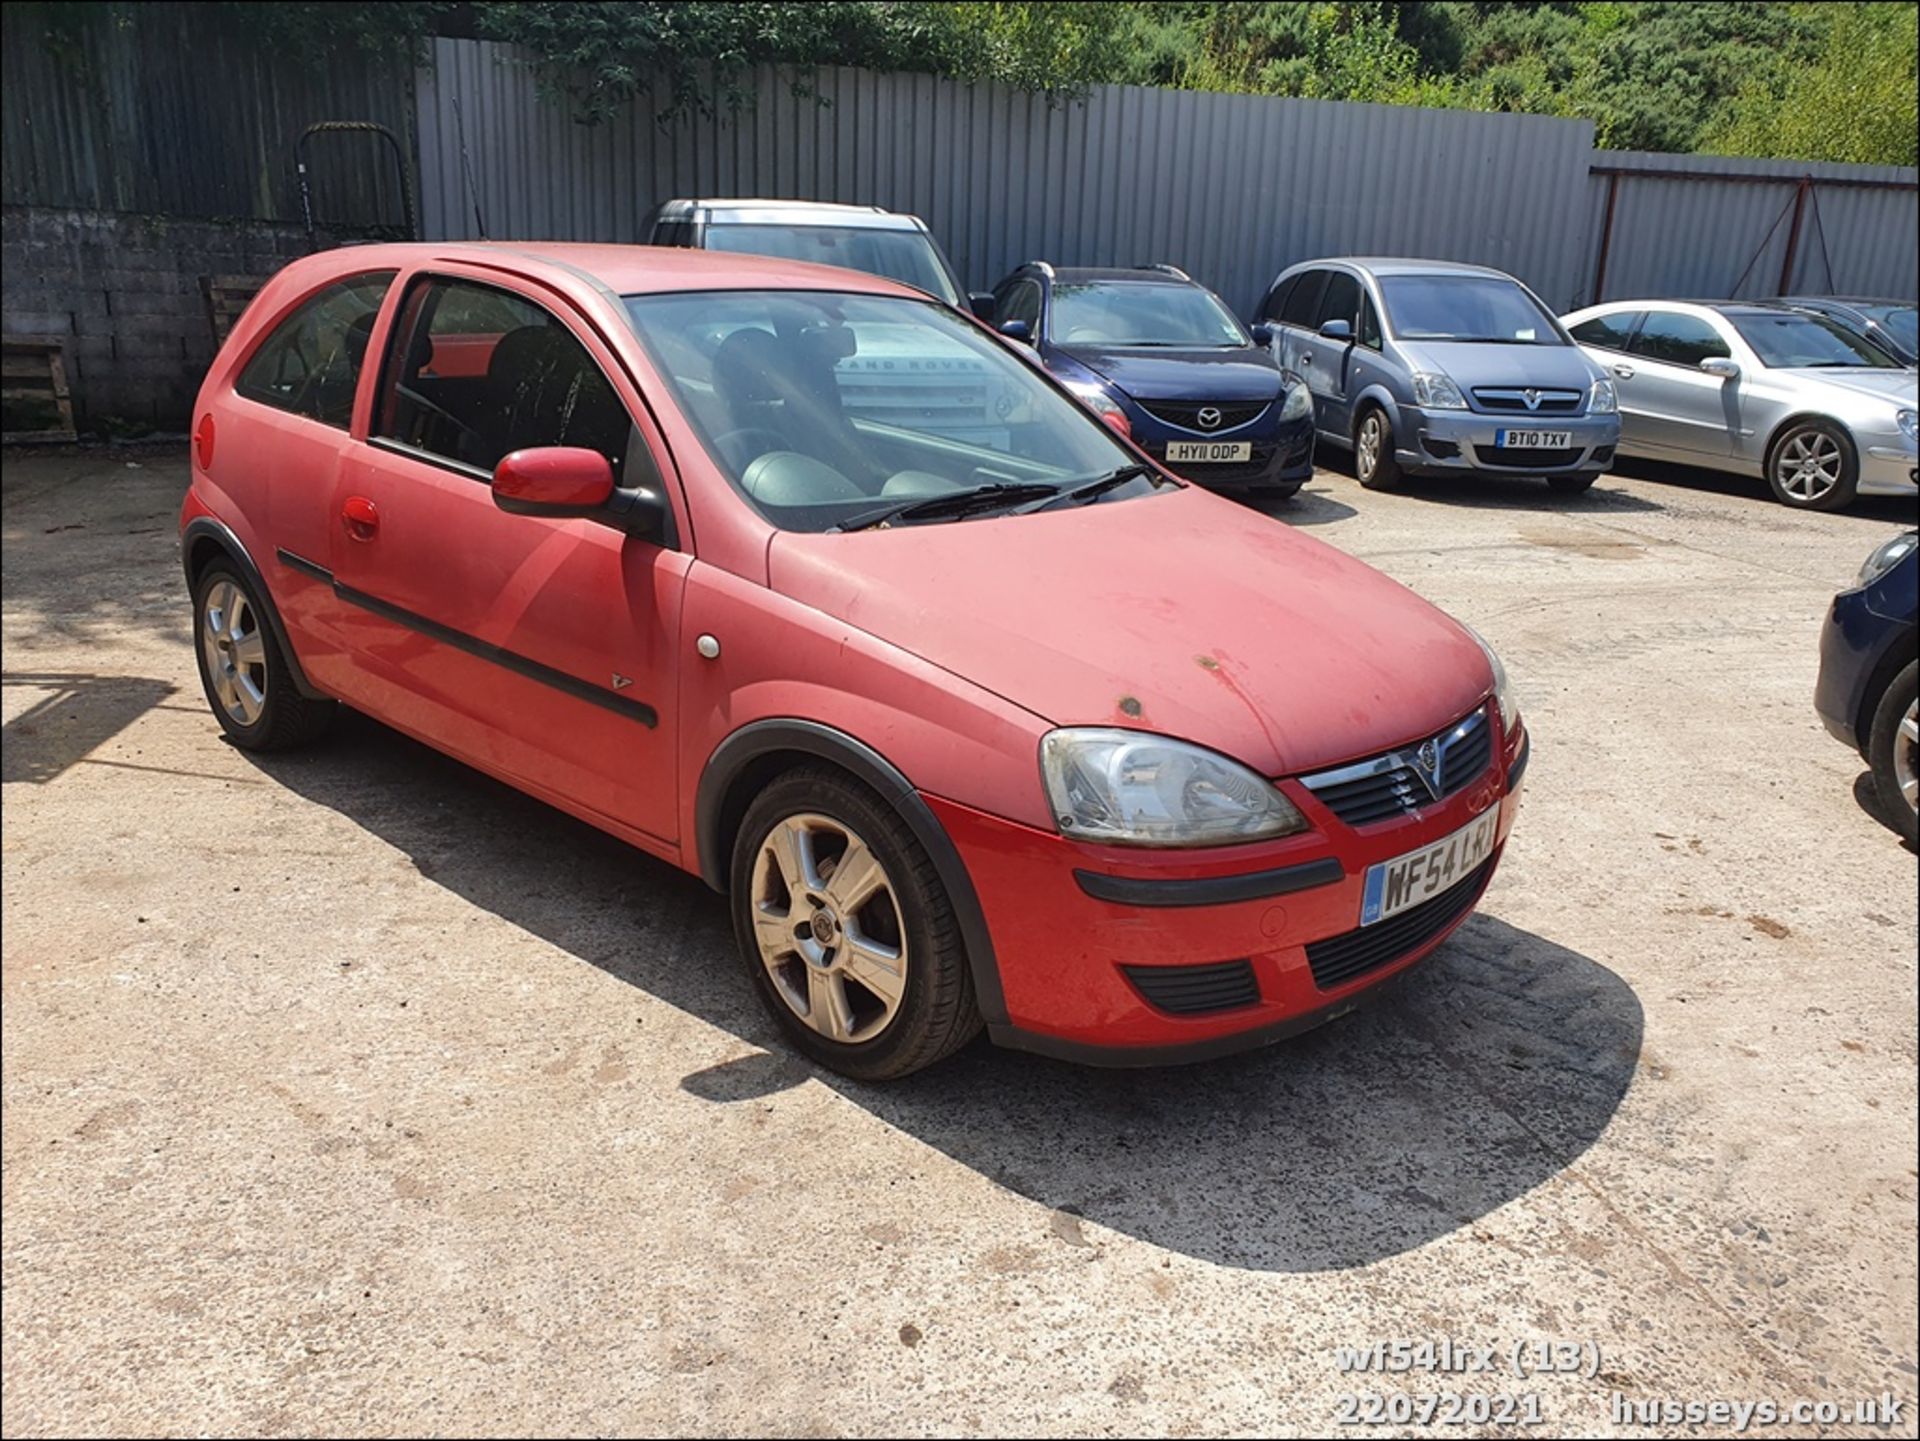 04/54 VAUXHALL CORSA ENERGY TWINPORT - 998cc 3dr Hatchback (Red, 61k) - Image 14 of 16